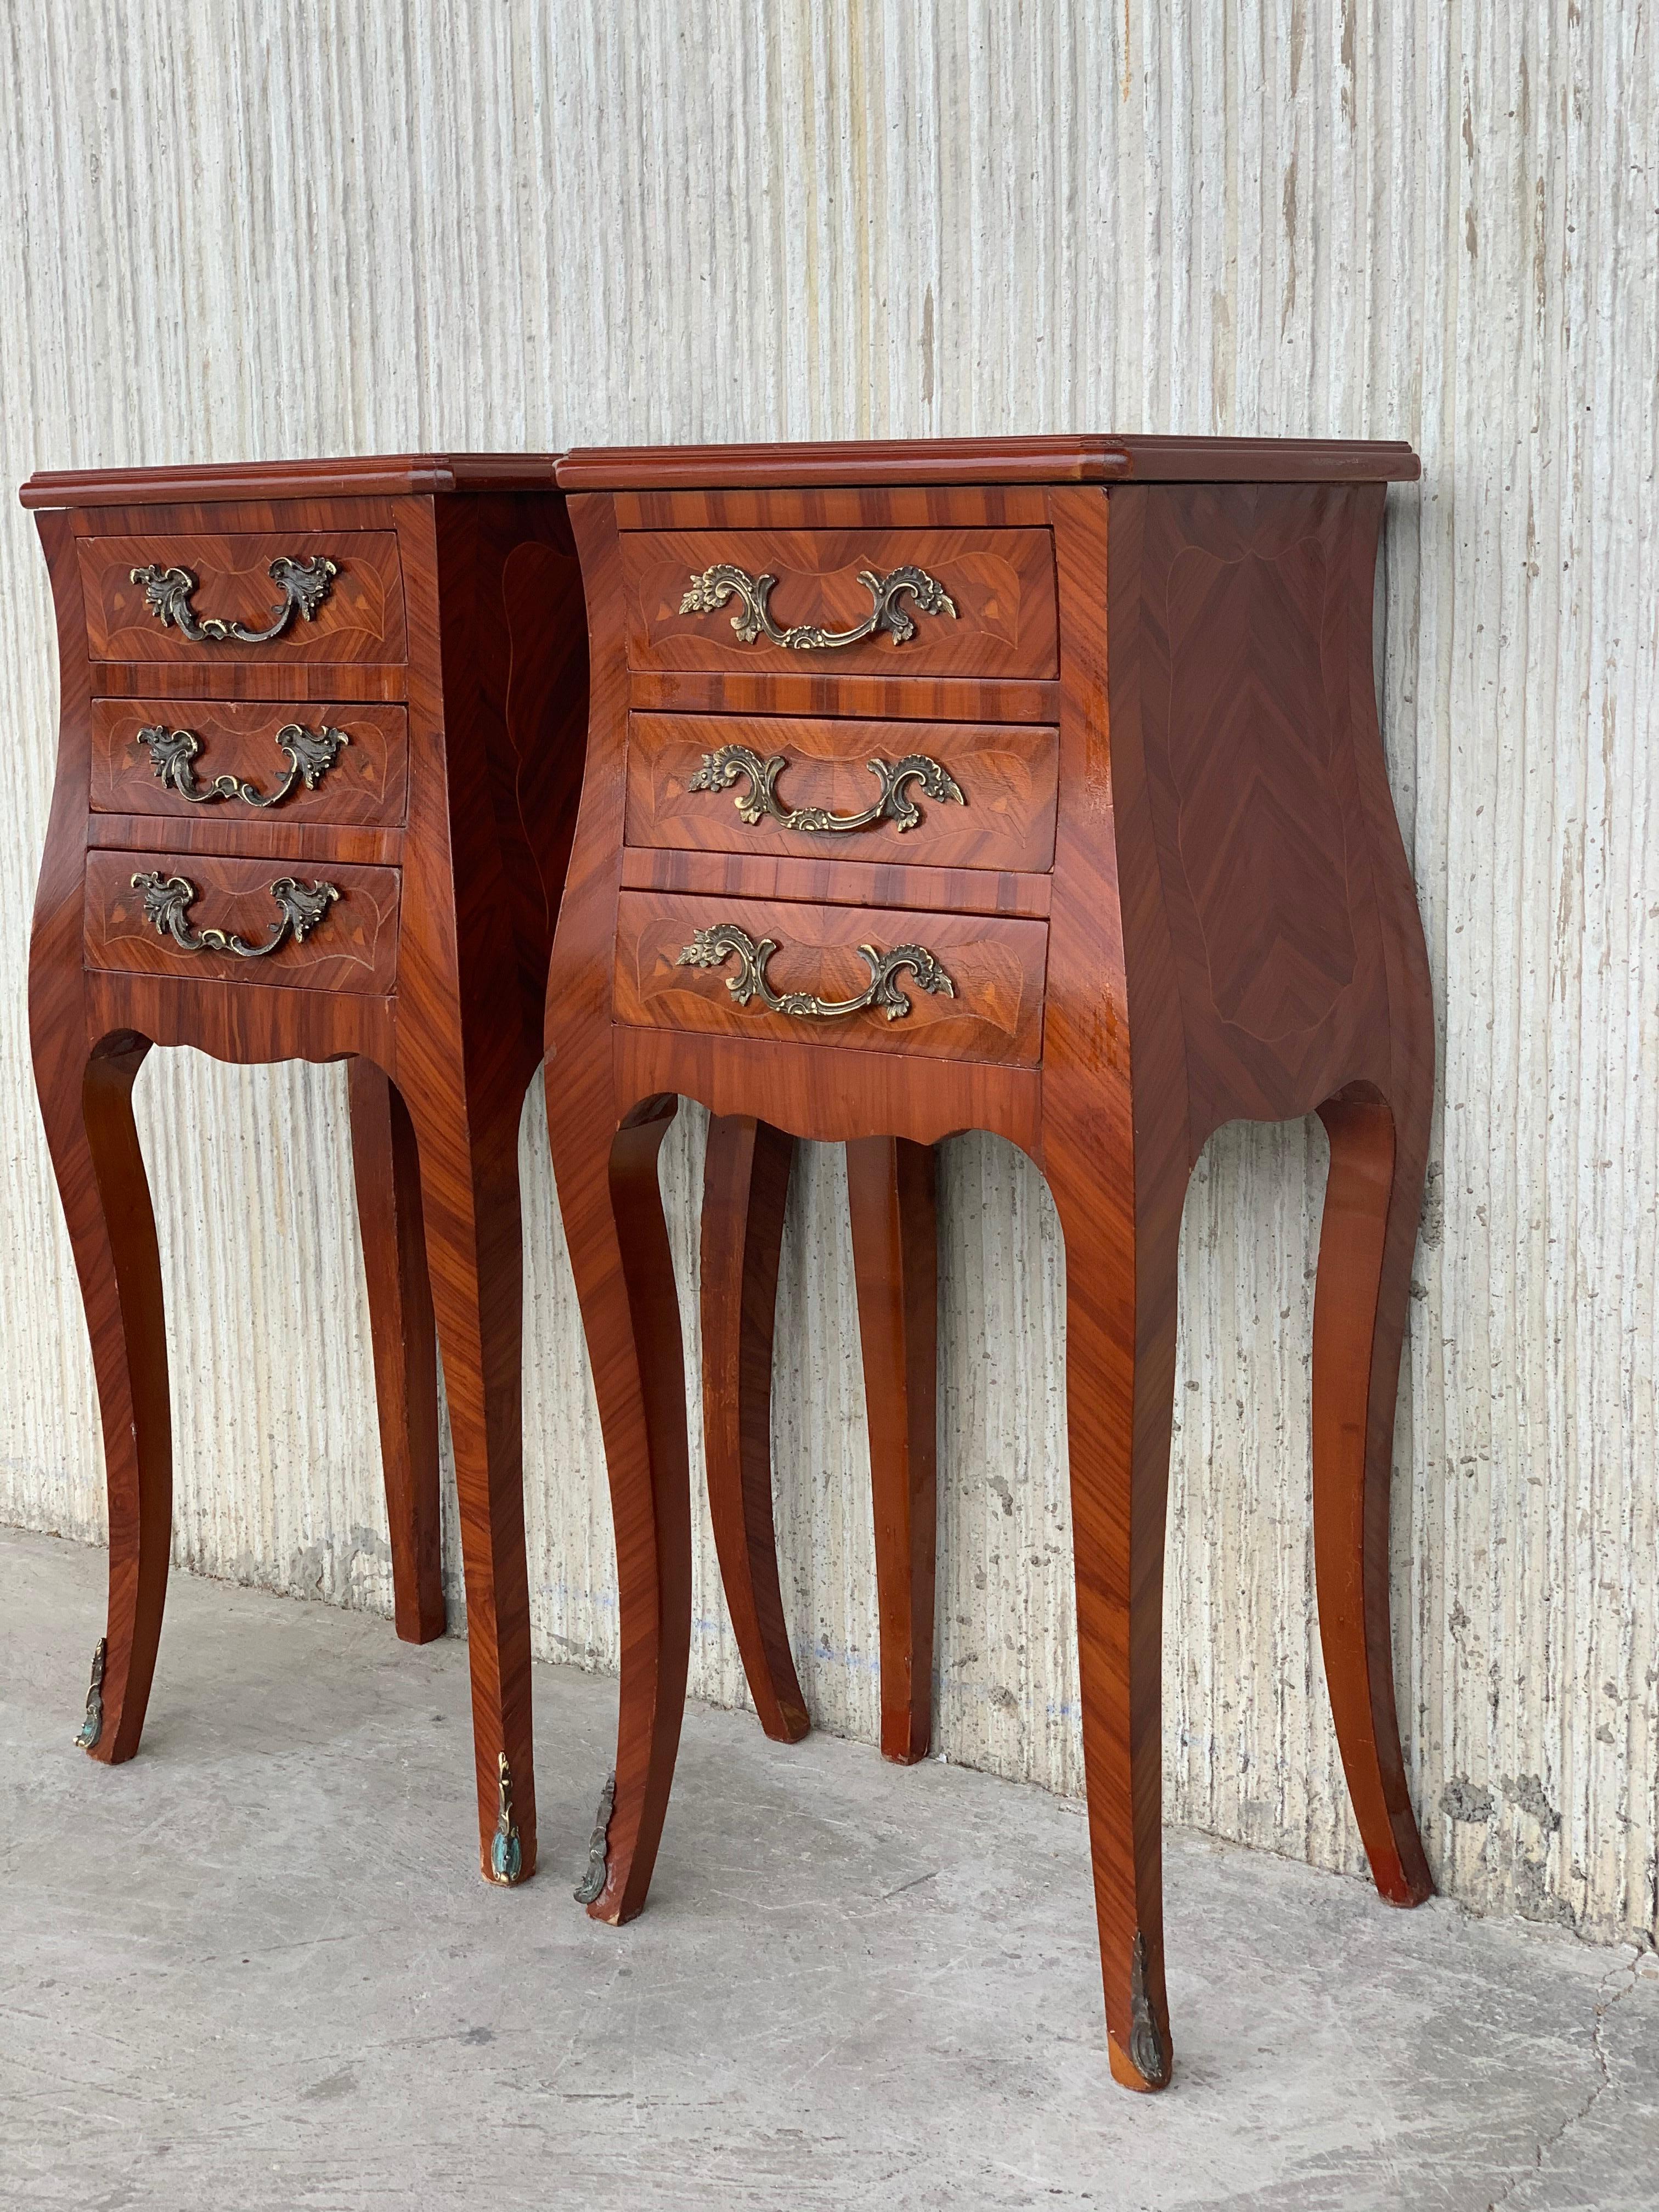 Louis XV style pair of marquetry nightstands with three drawers and cabriole legs.